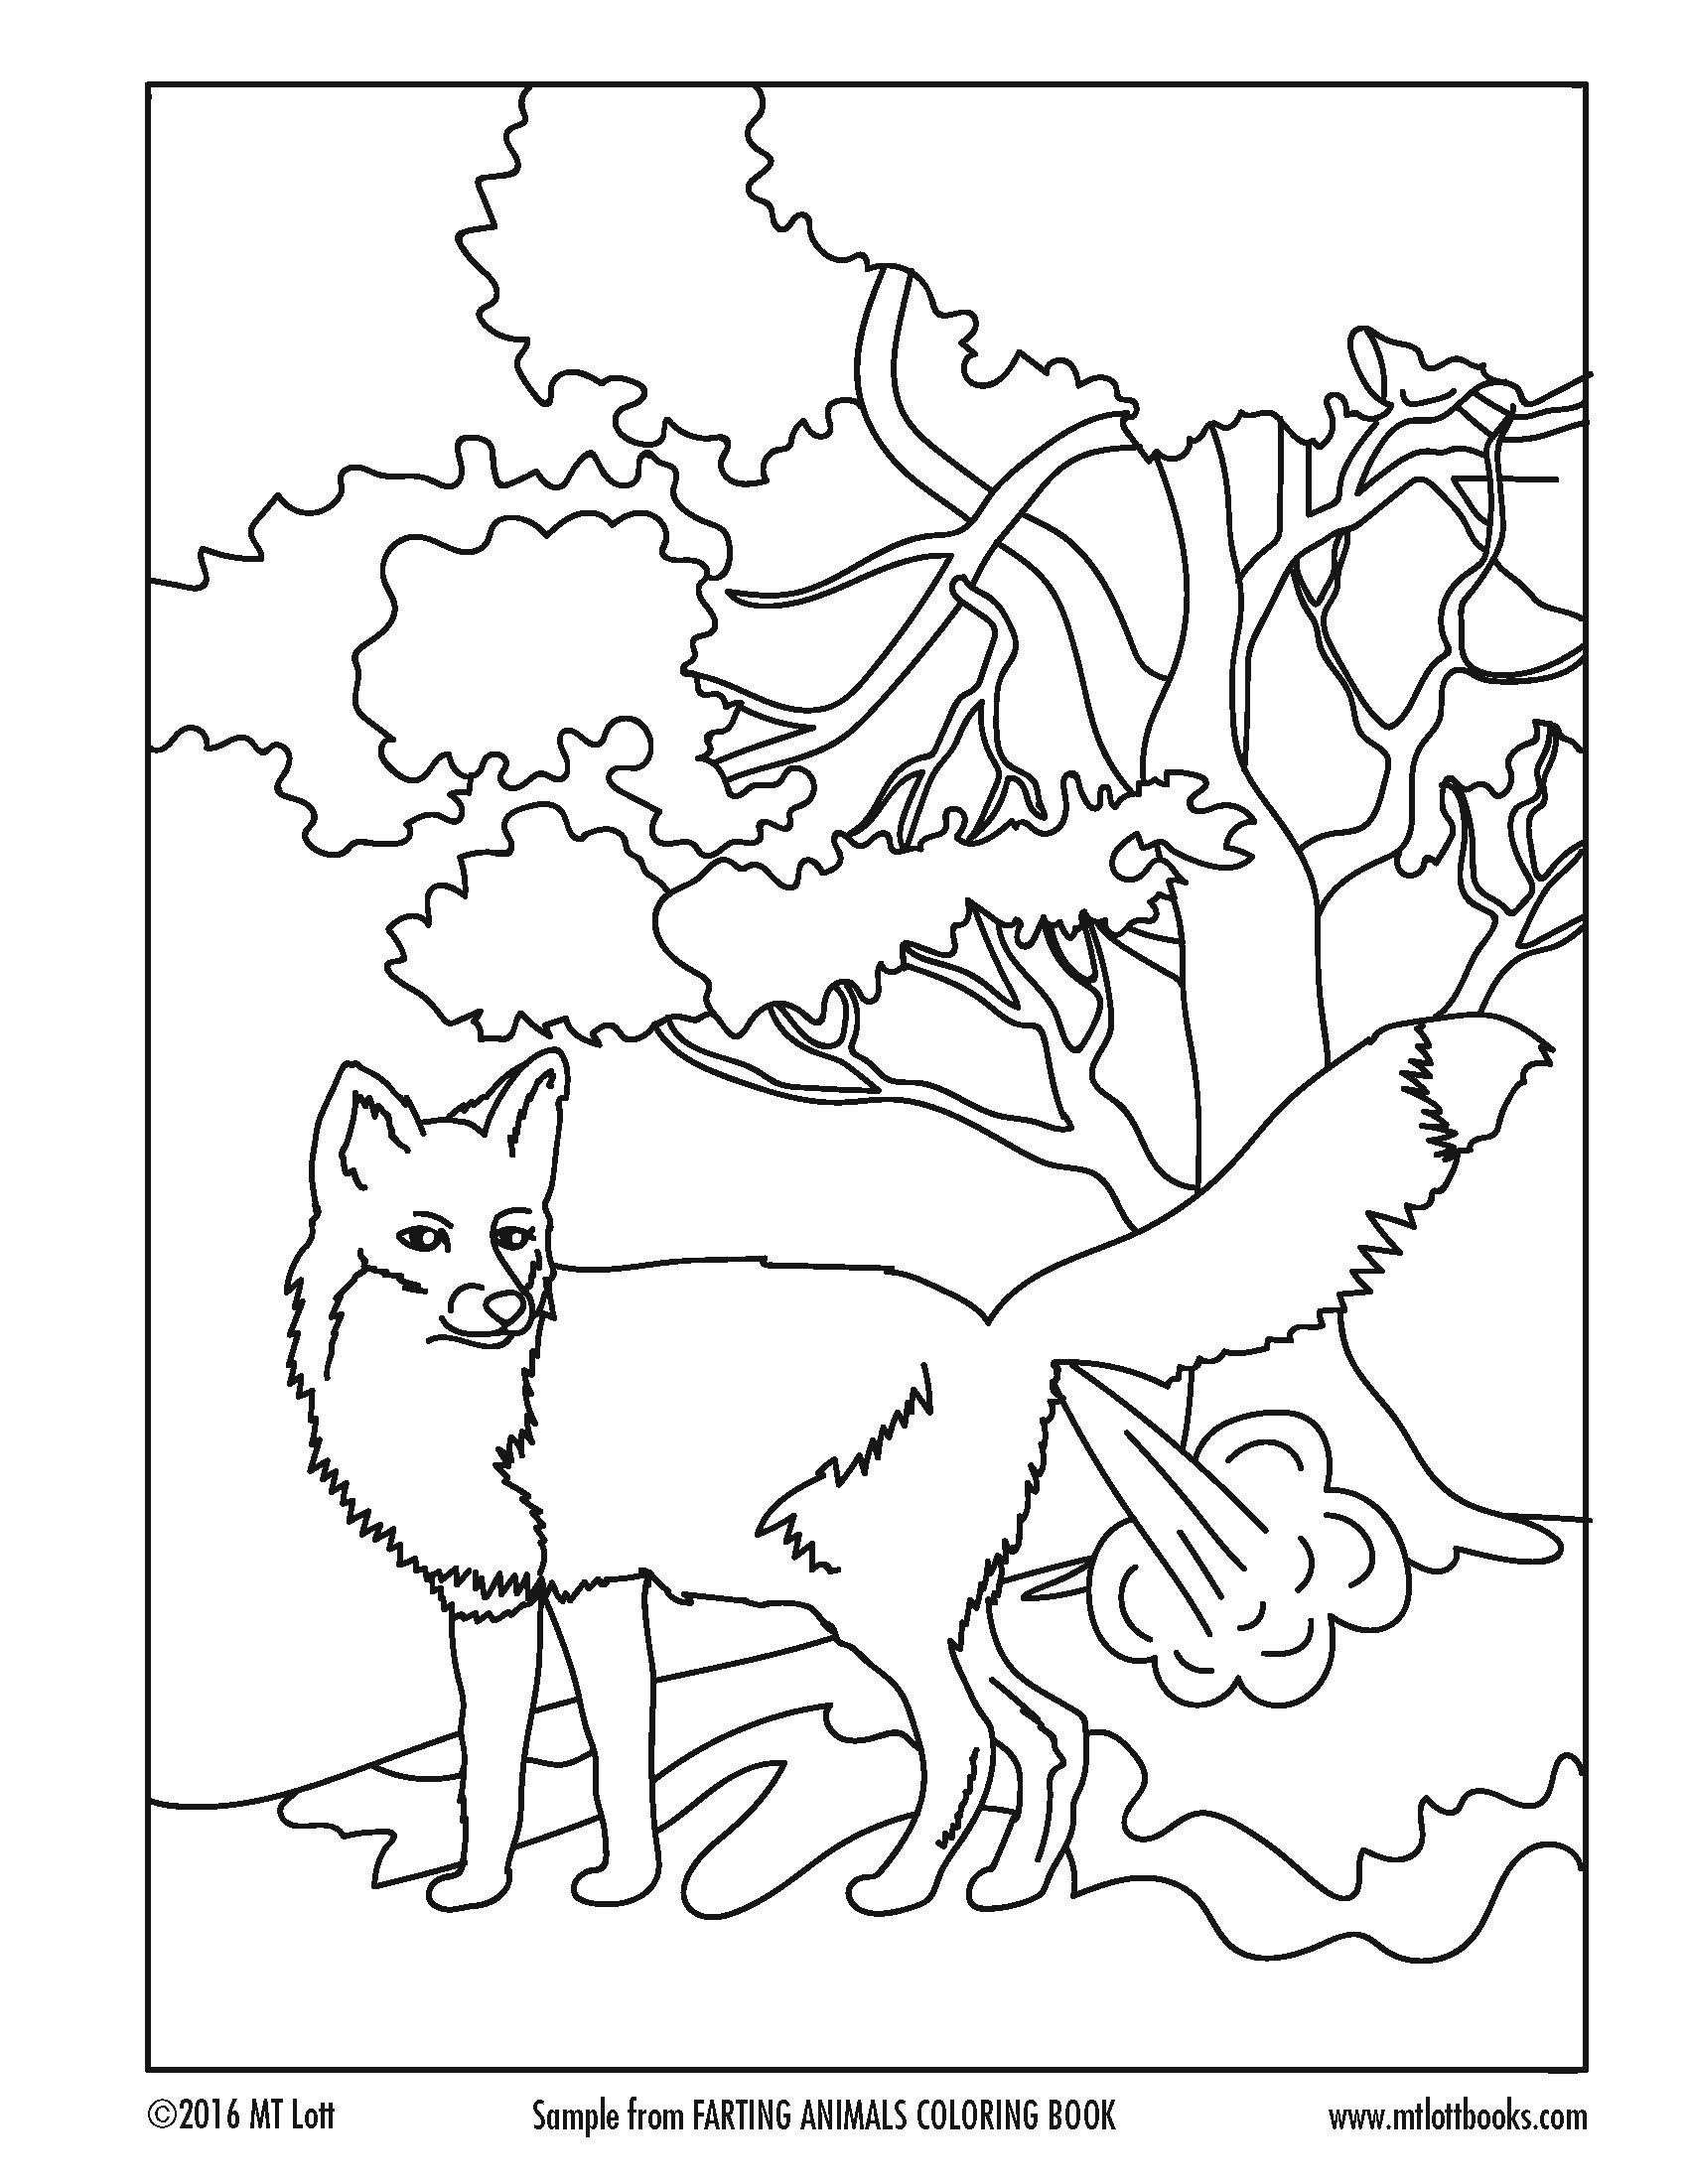 Disney Princess Minimalist Free Coloring Sheets Free Coloring Page From M T Lott S Farting Animals Coloring